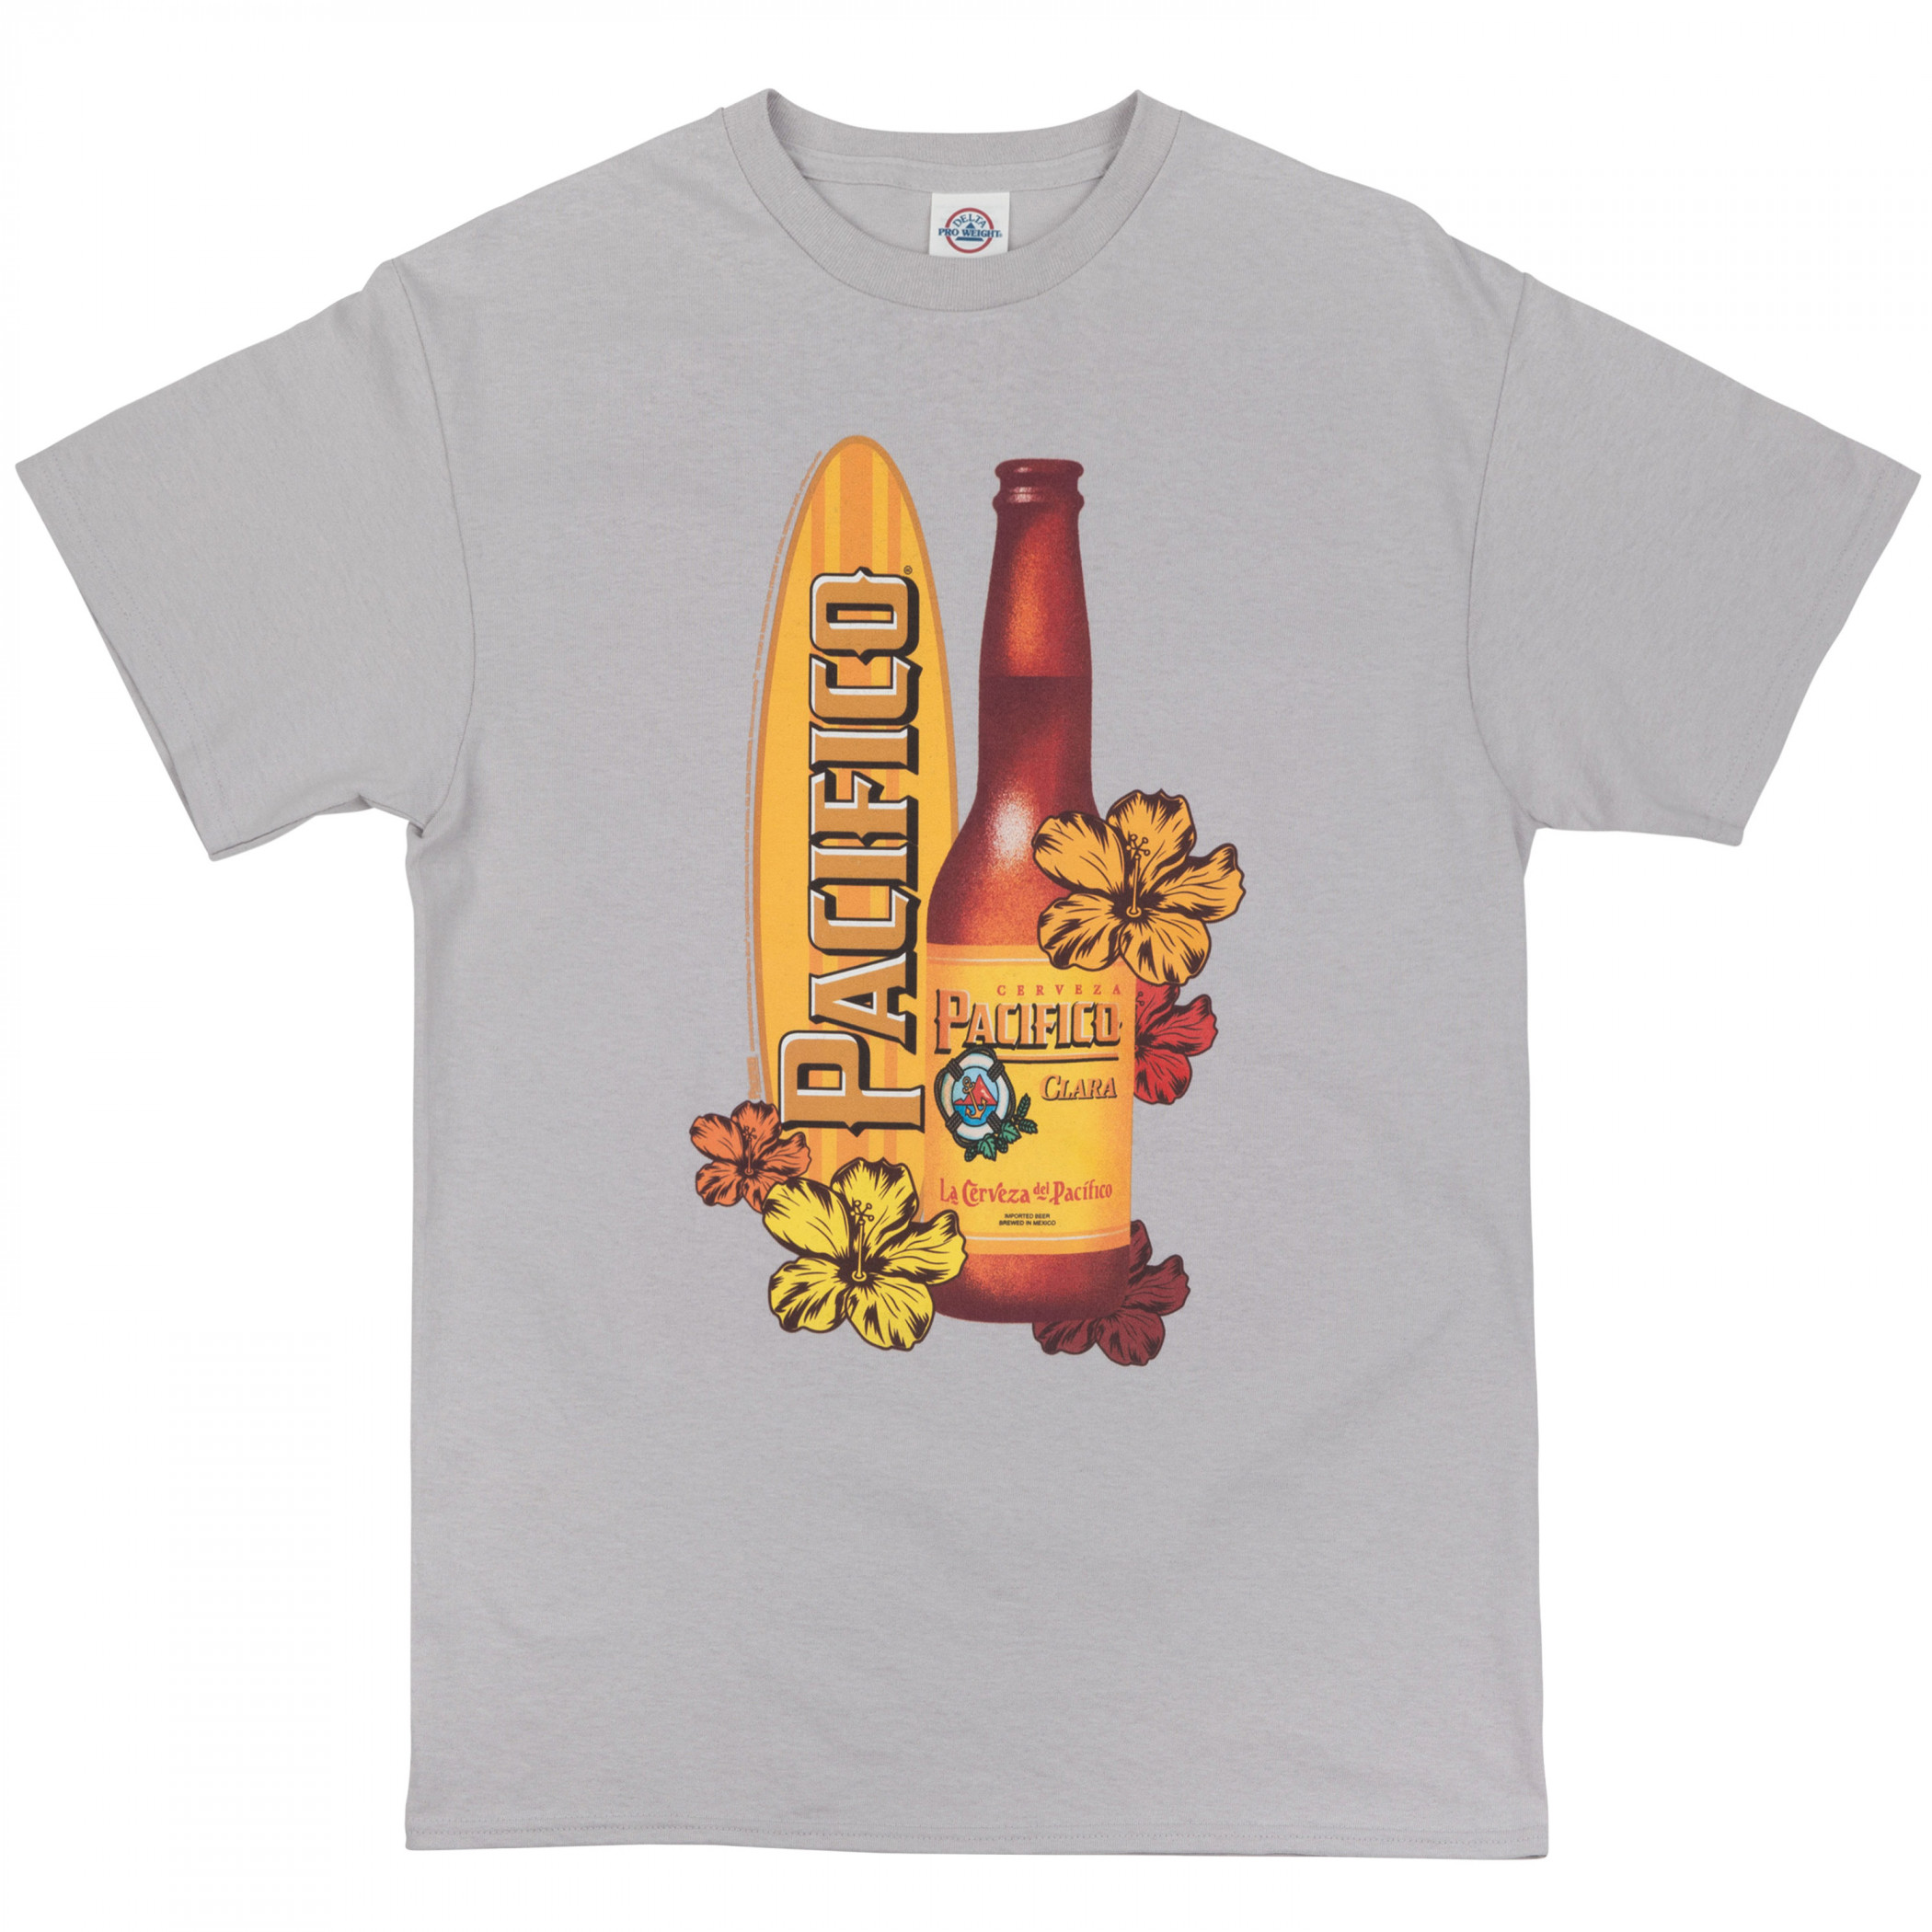 Pacifico Tropical Surfing T-Shirt